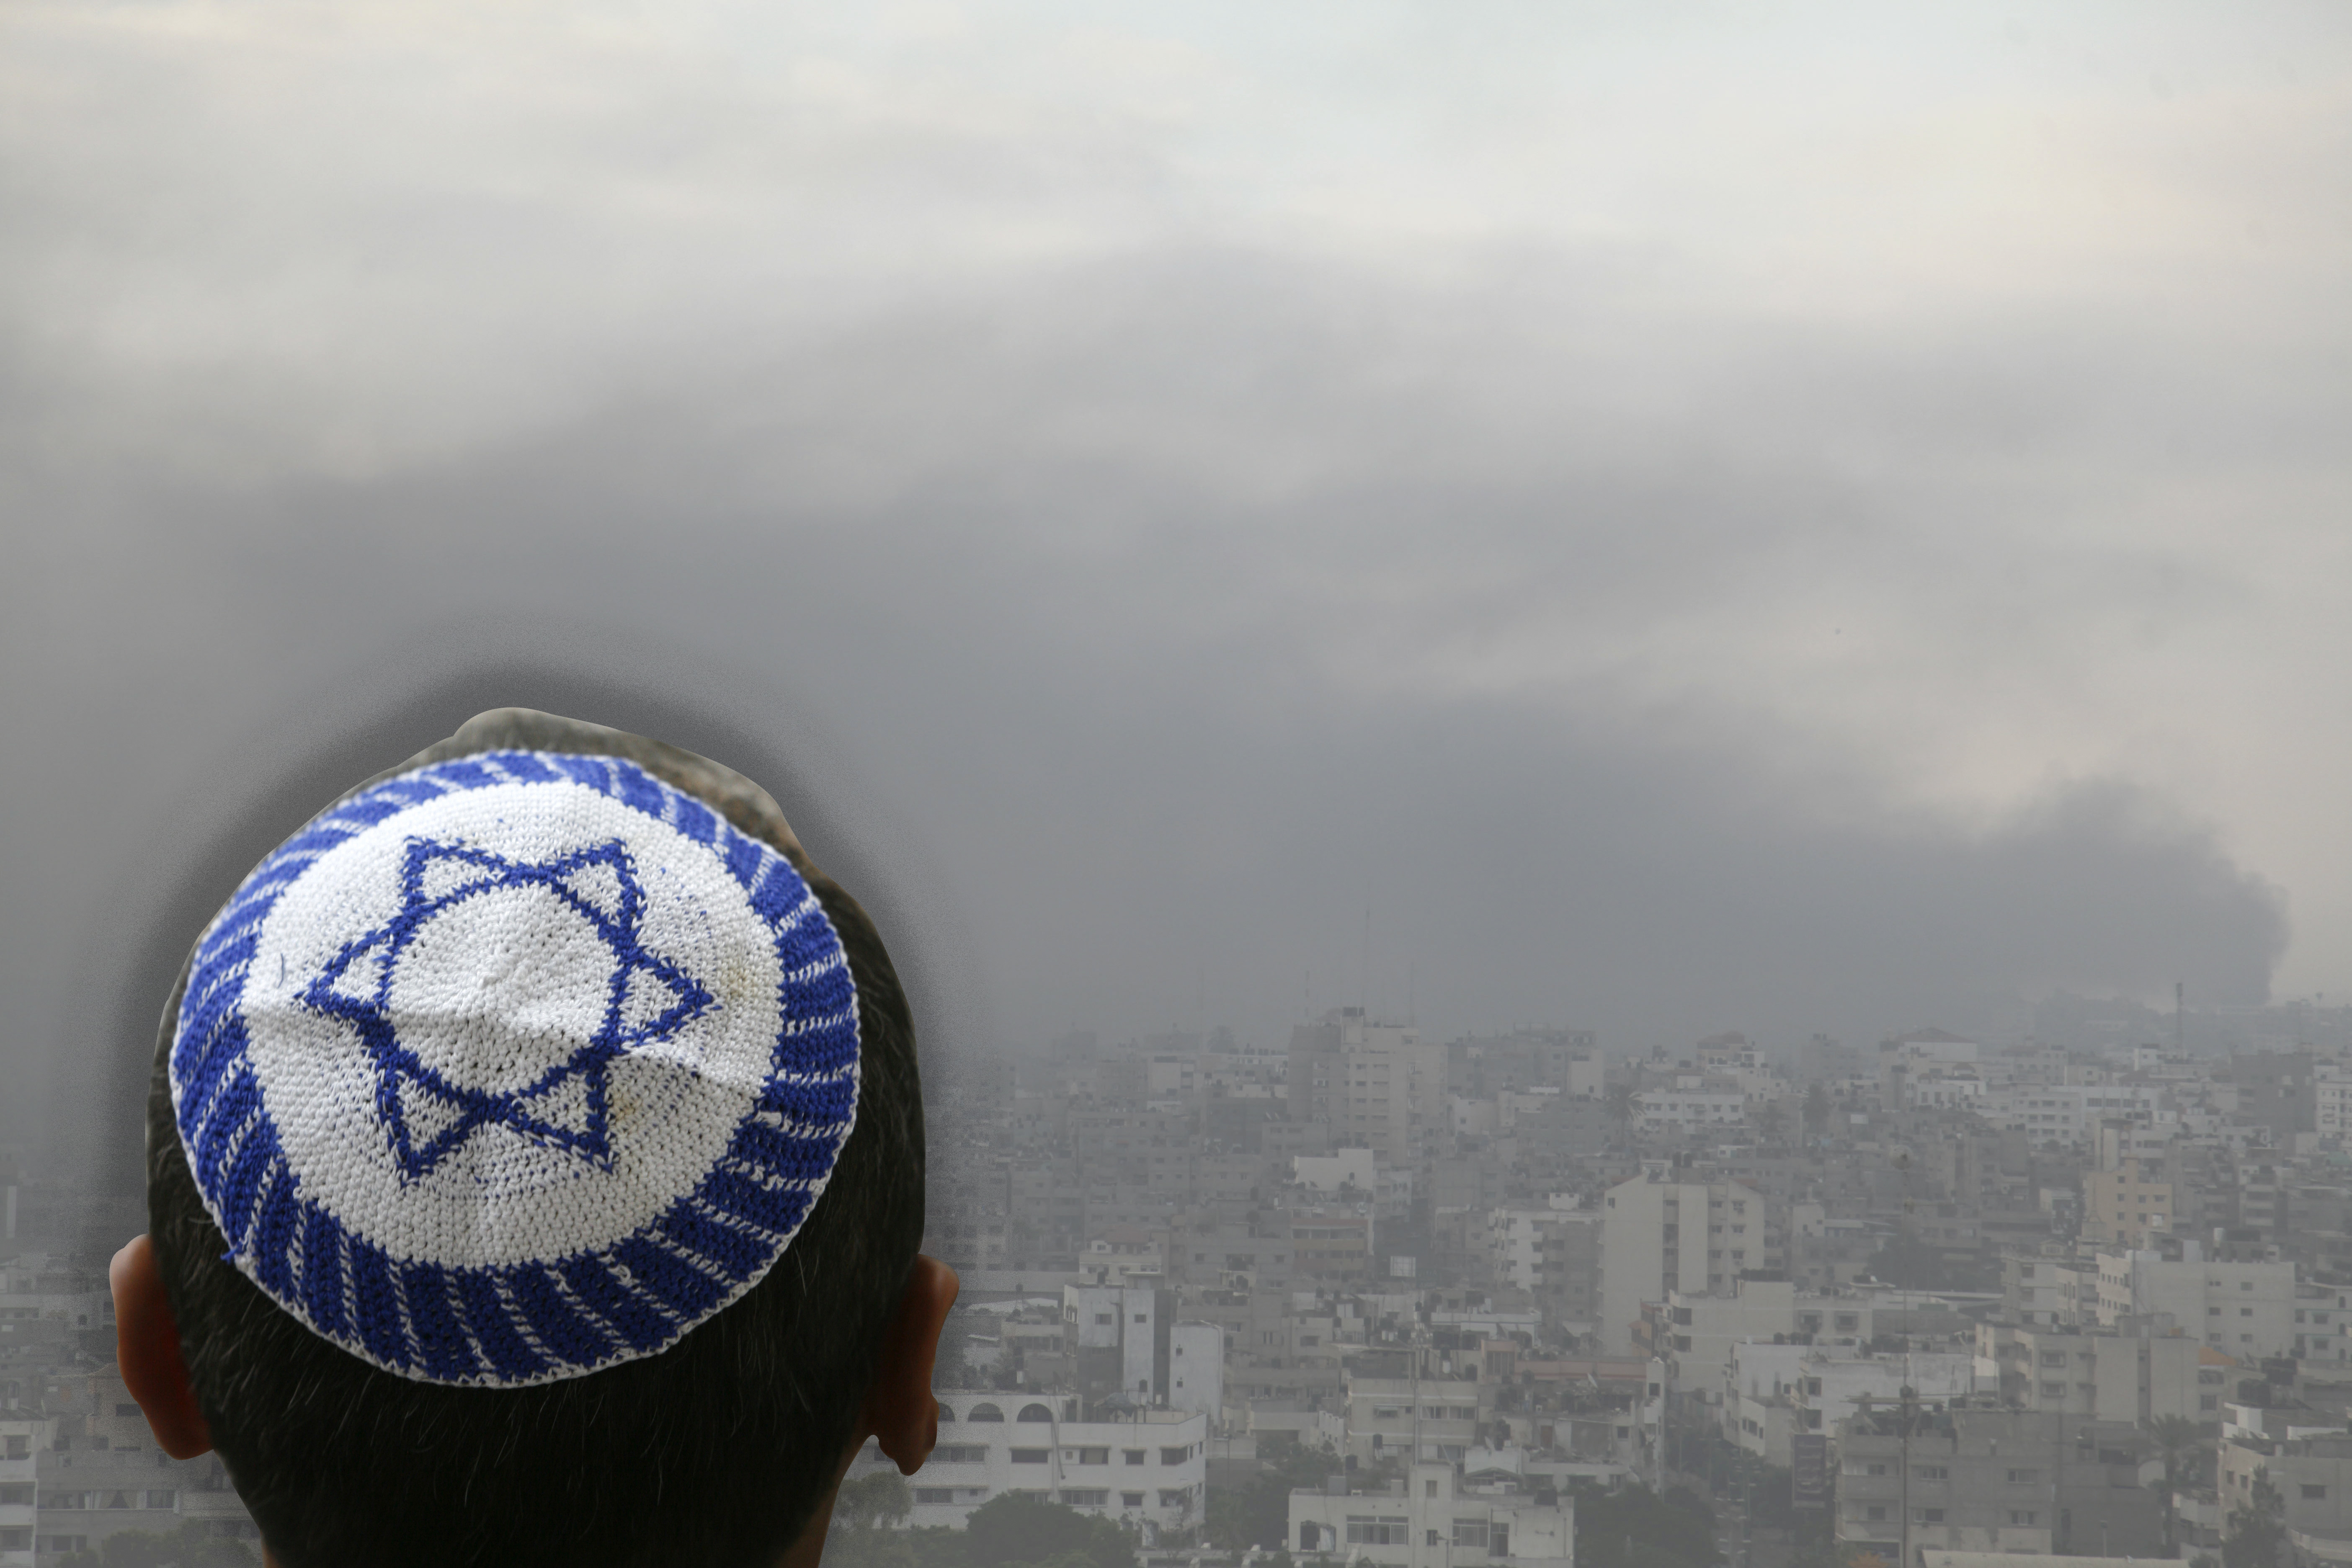 Israel will remain different so long as it defines itself in Zionist terms.